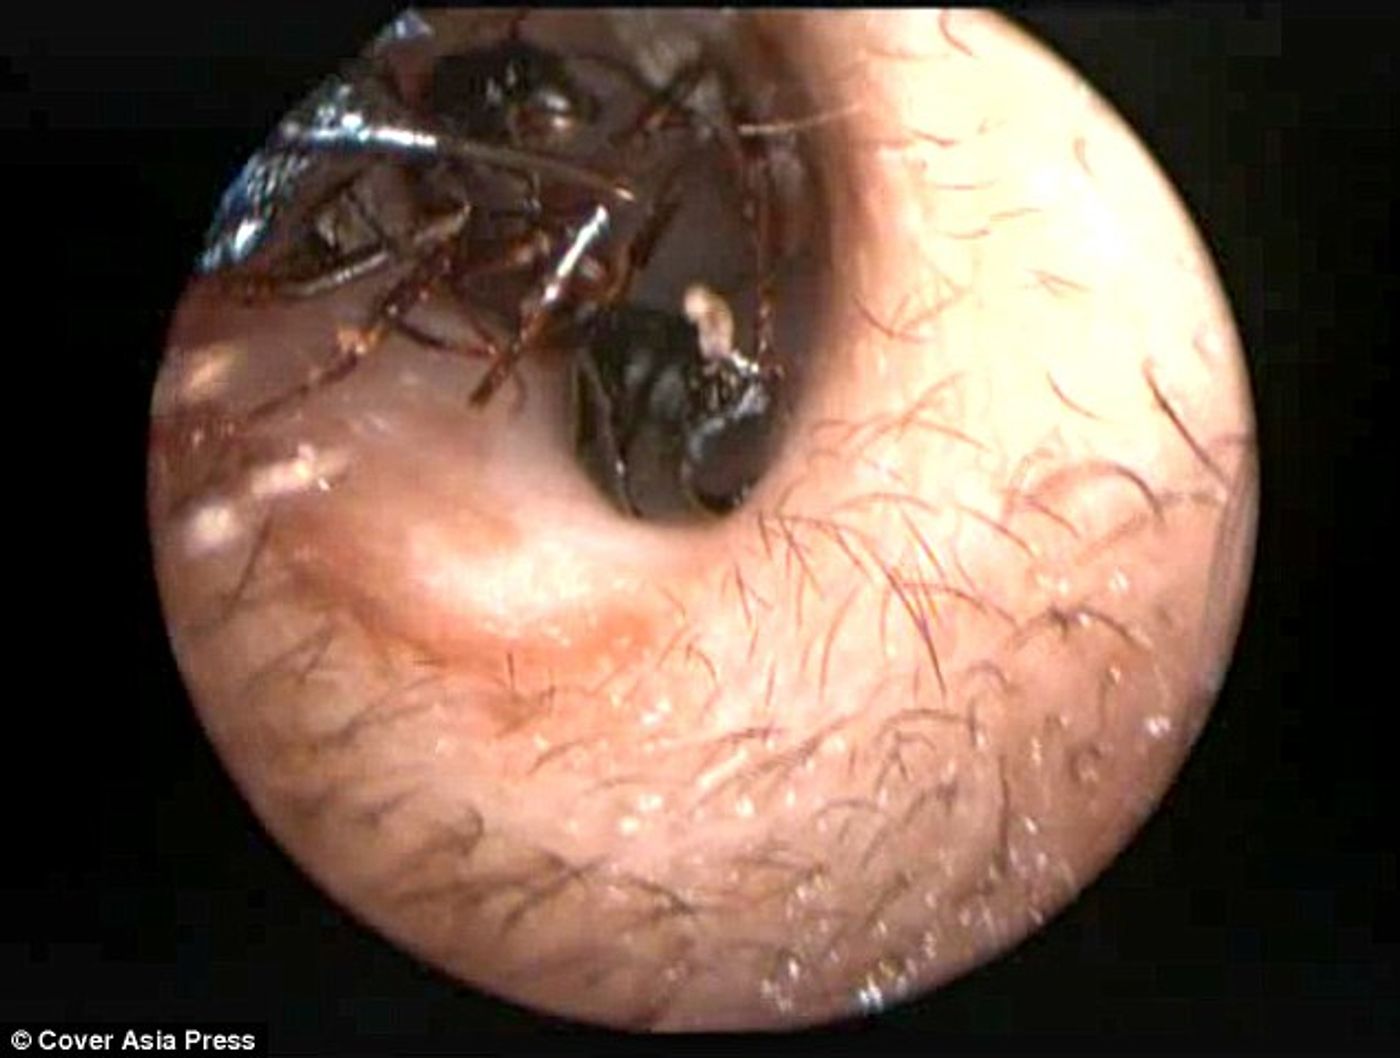 Ants are removed from the girl's ears in a procedure.